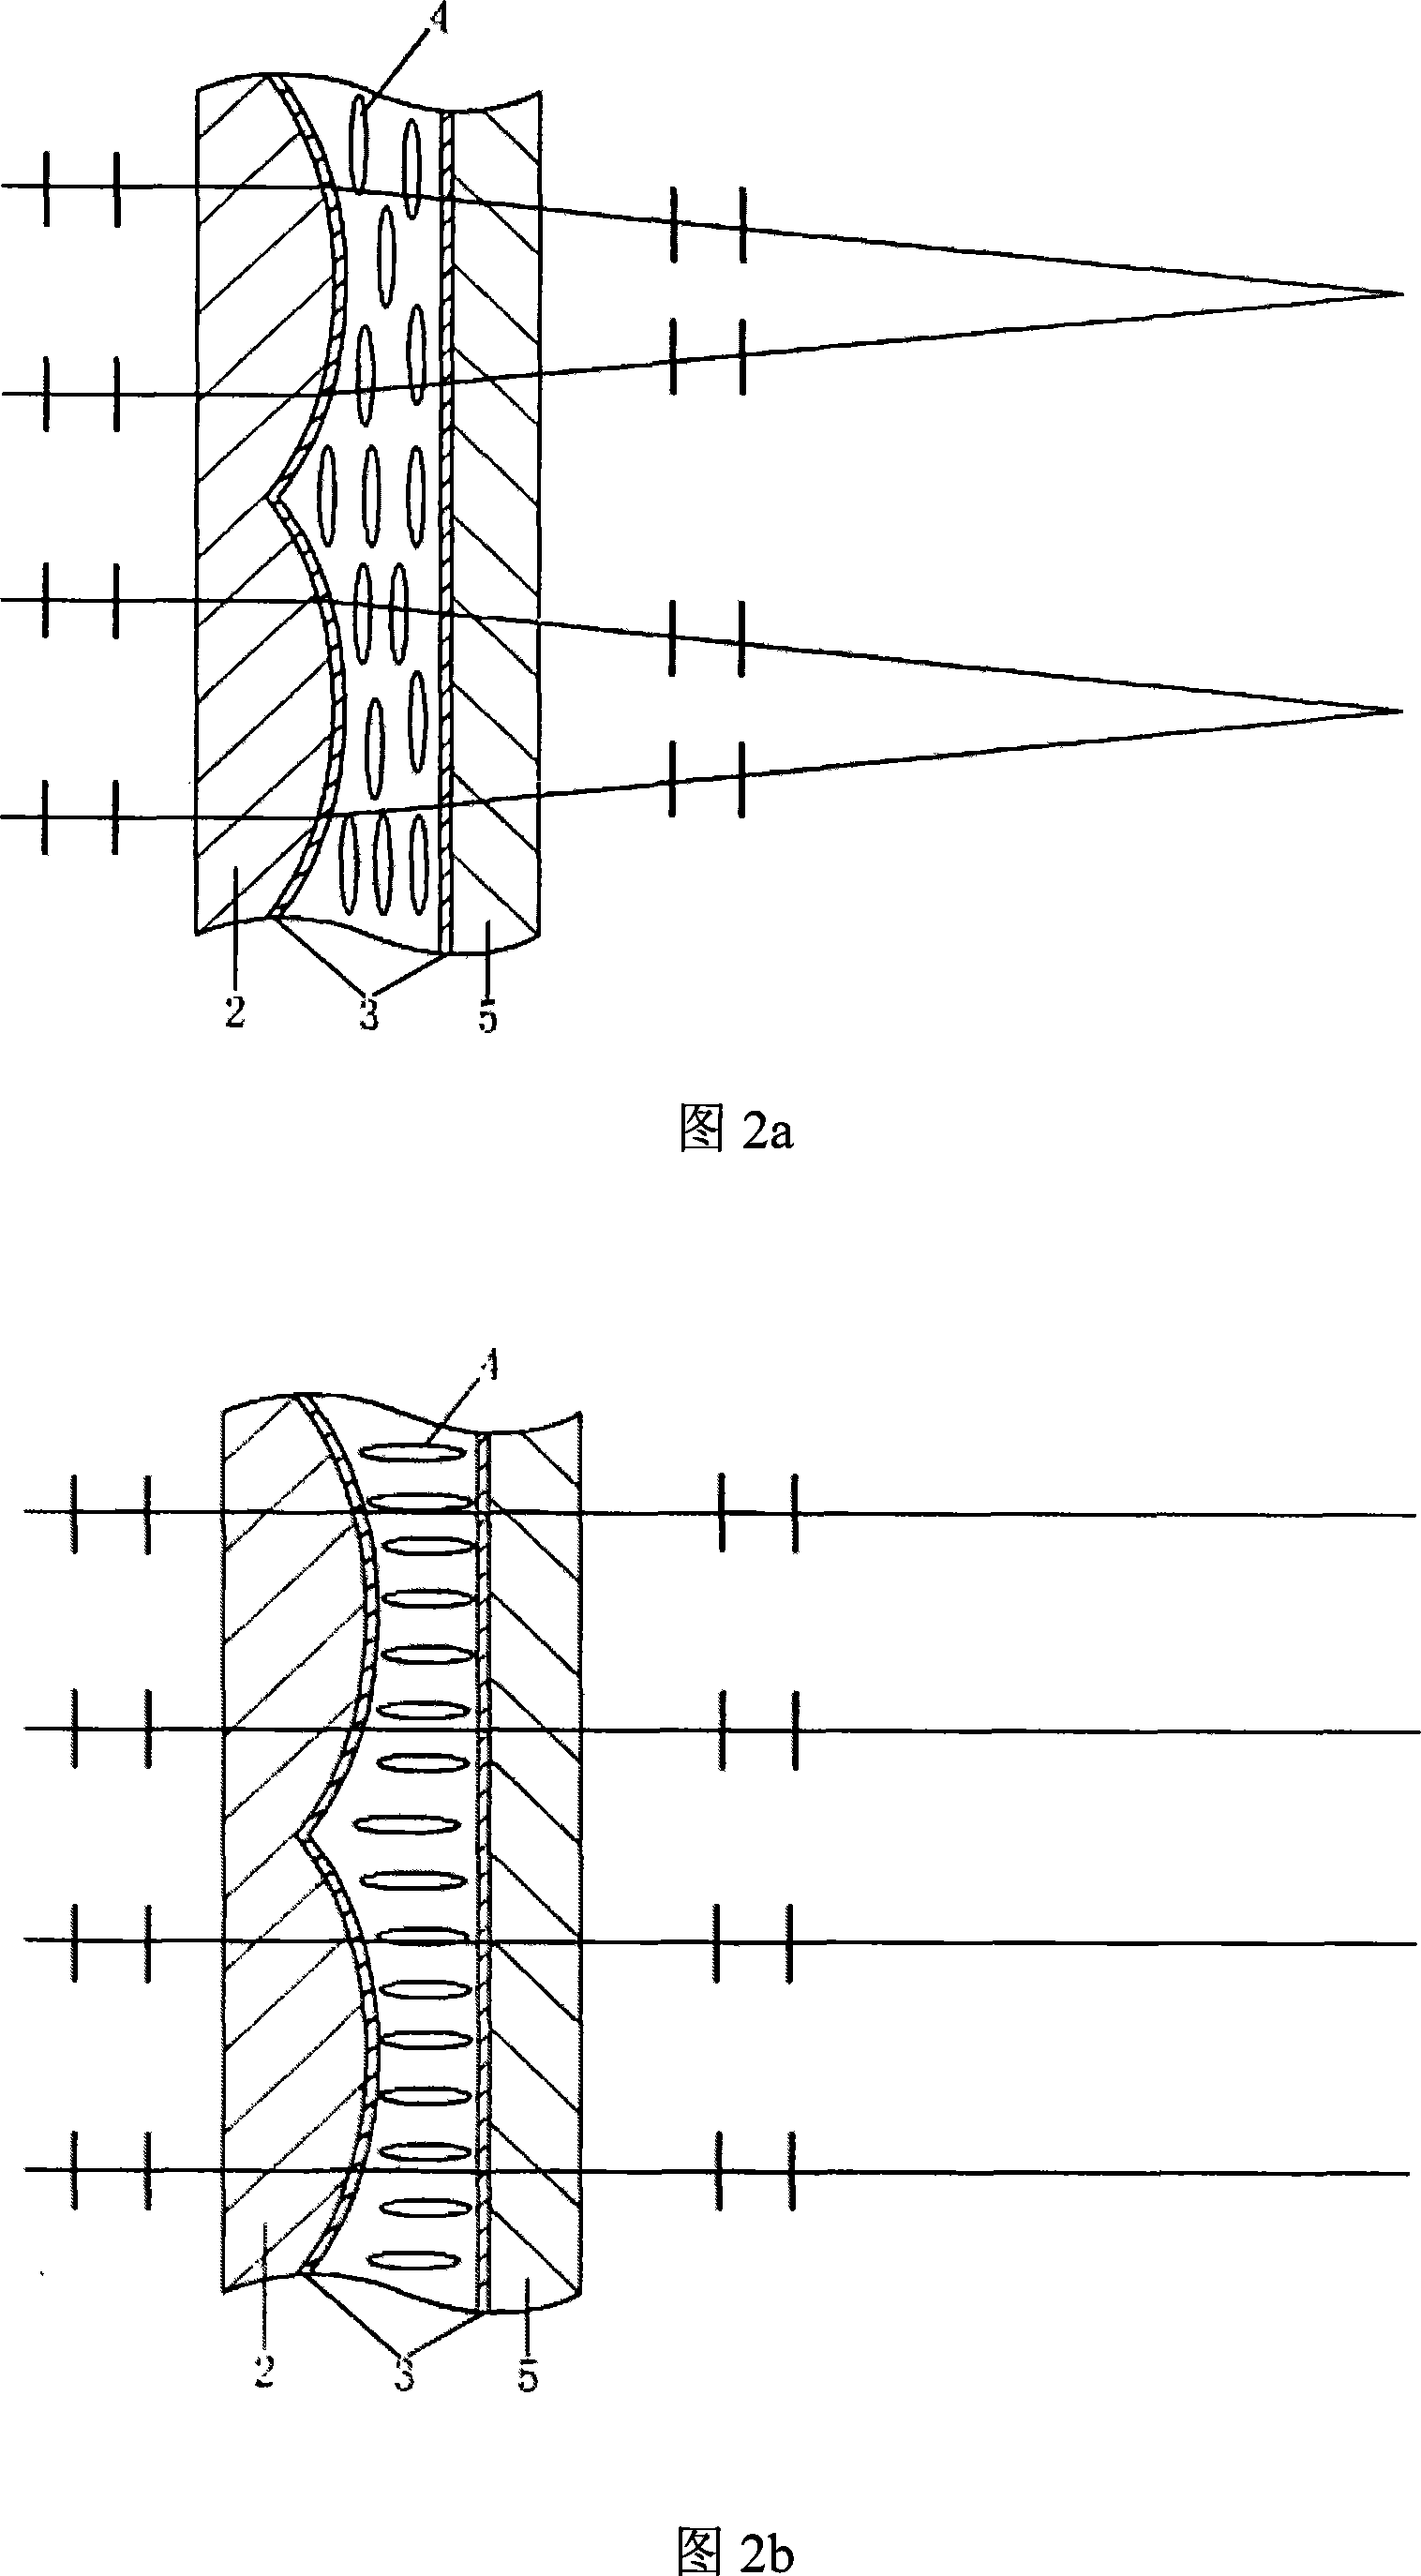 2D-3D switching stereo display device